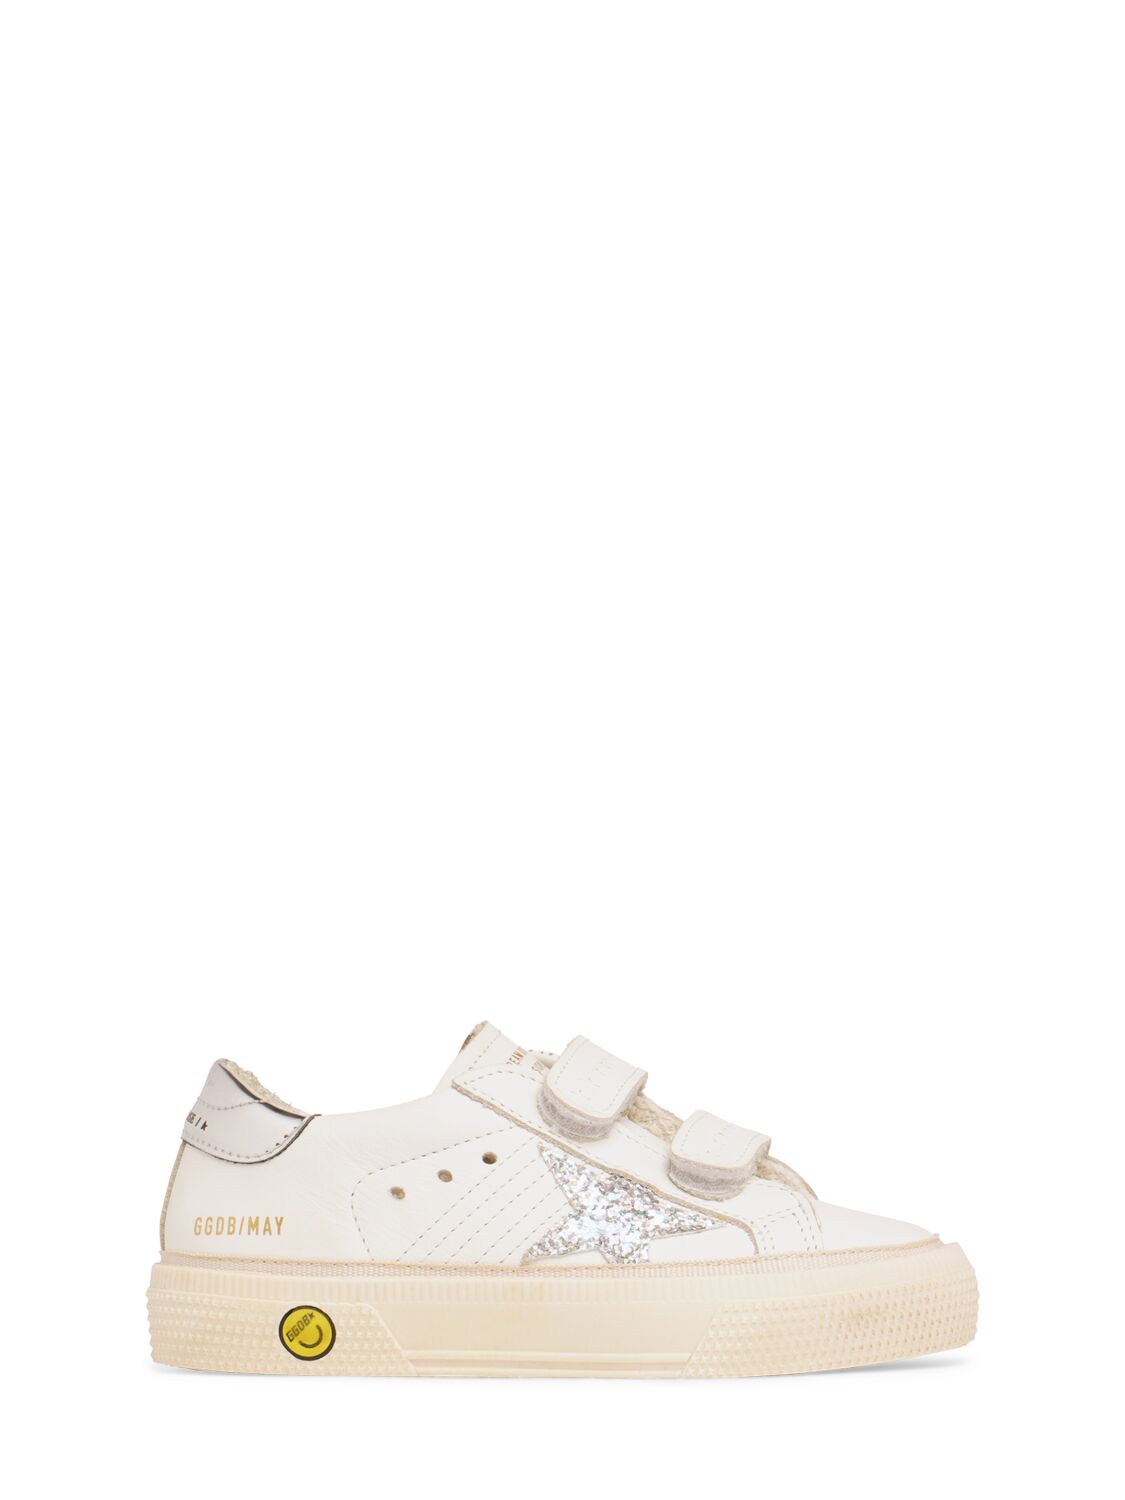 GOLDEN GOOSE MAY SCHOOL LEATHER STRAP SNEAKERS